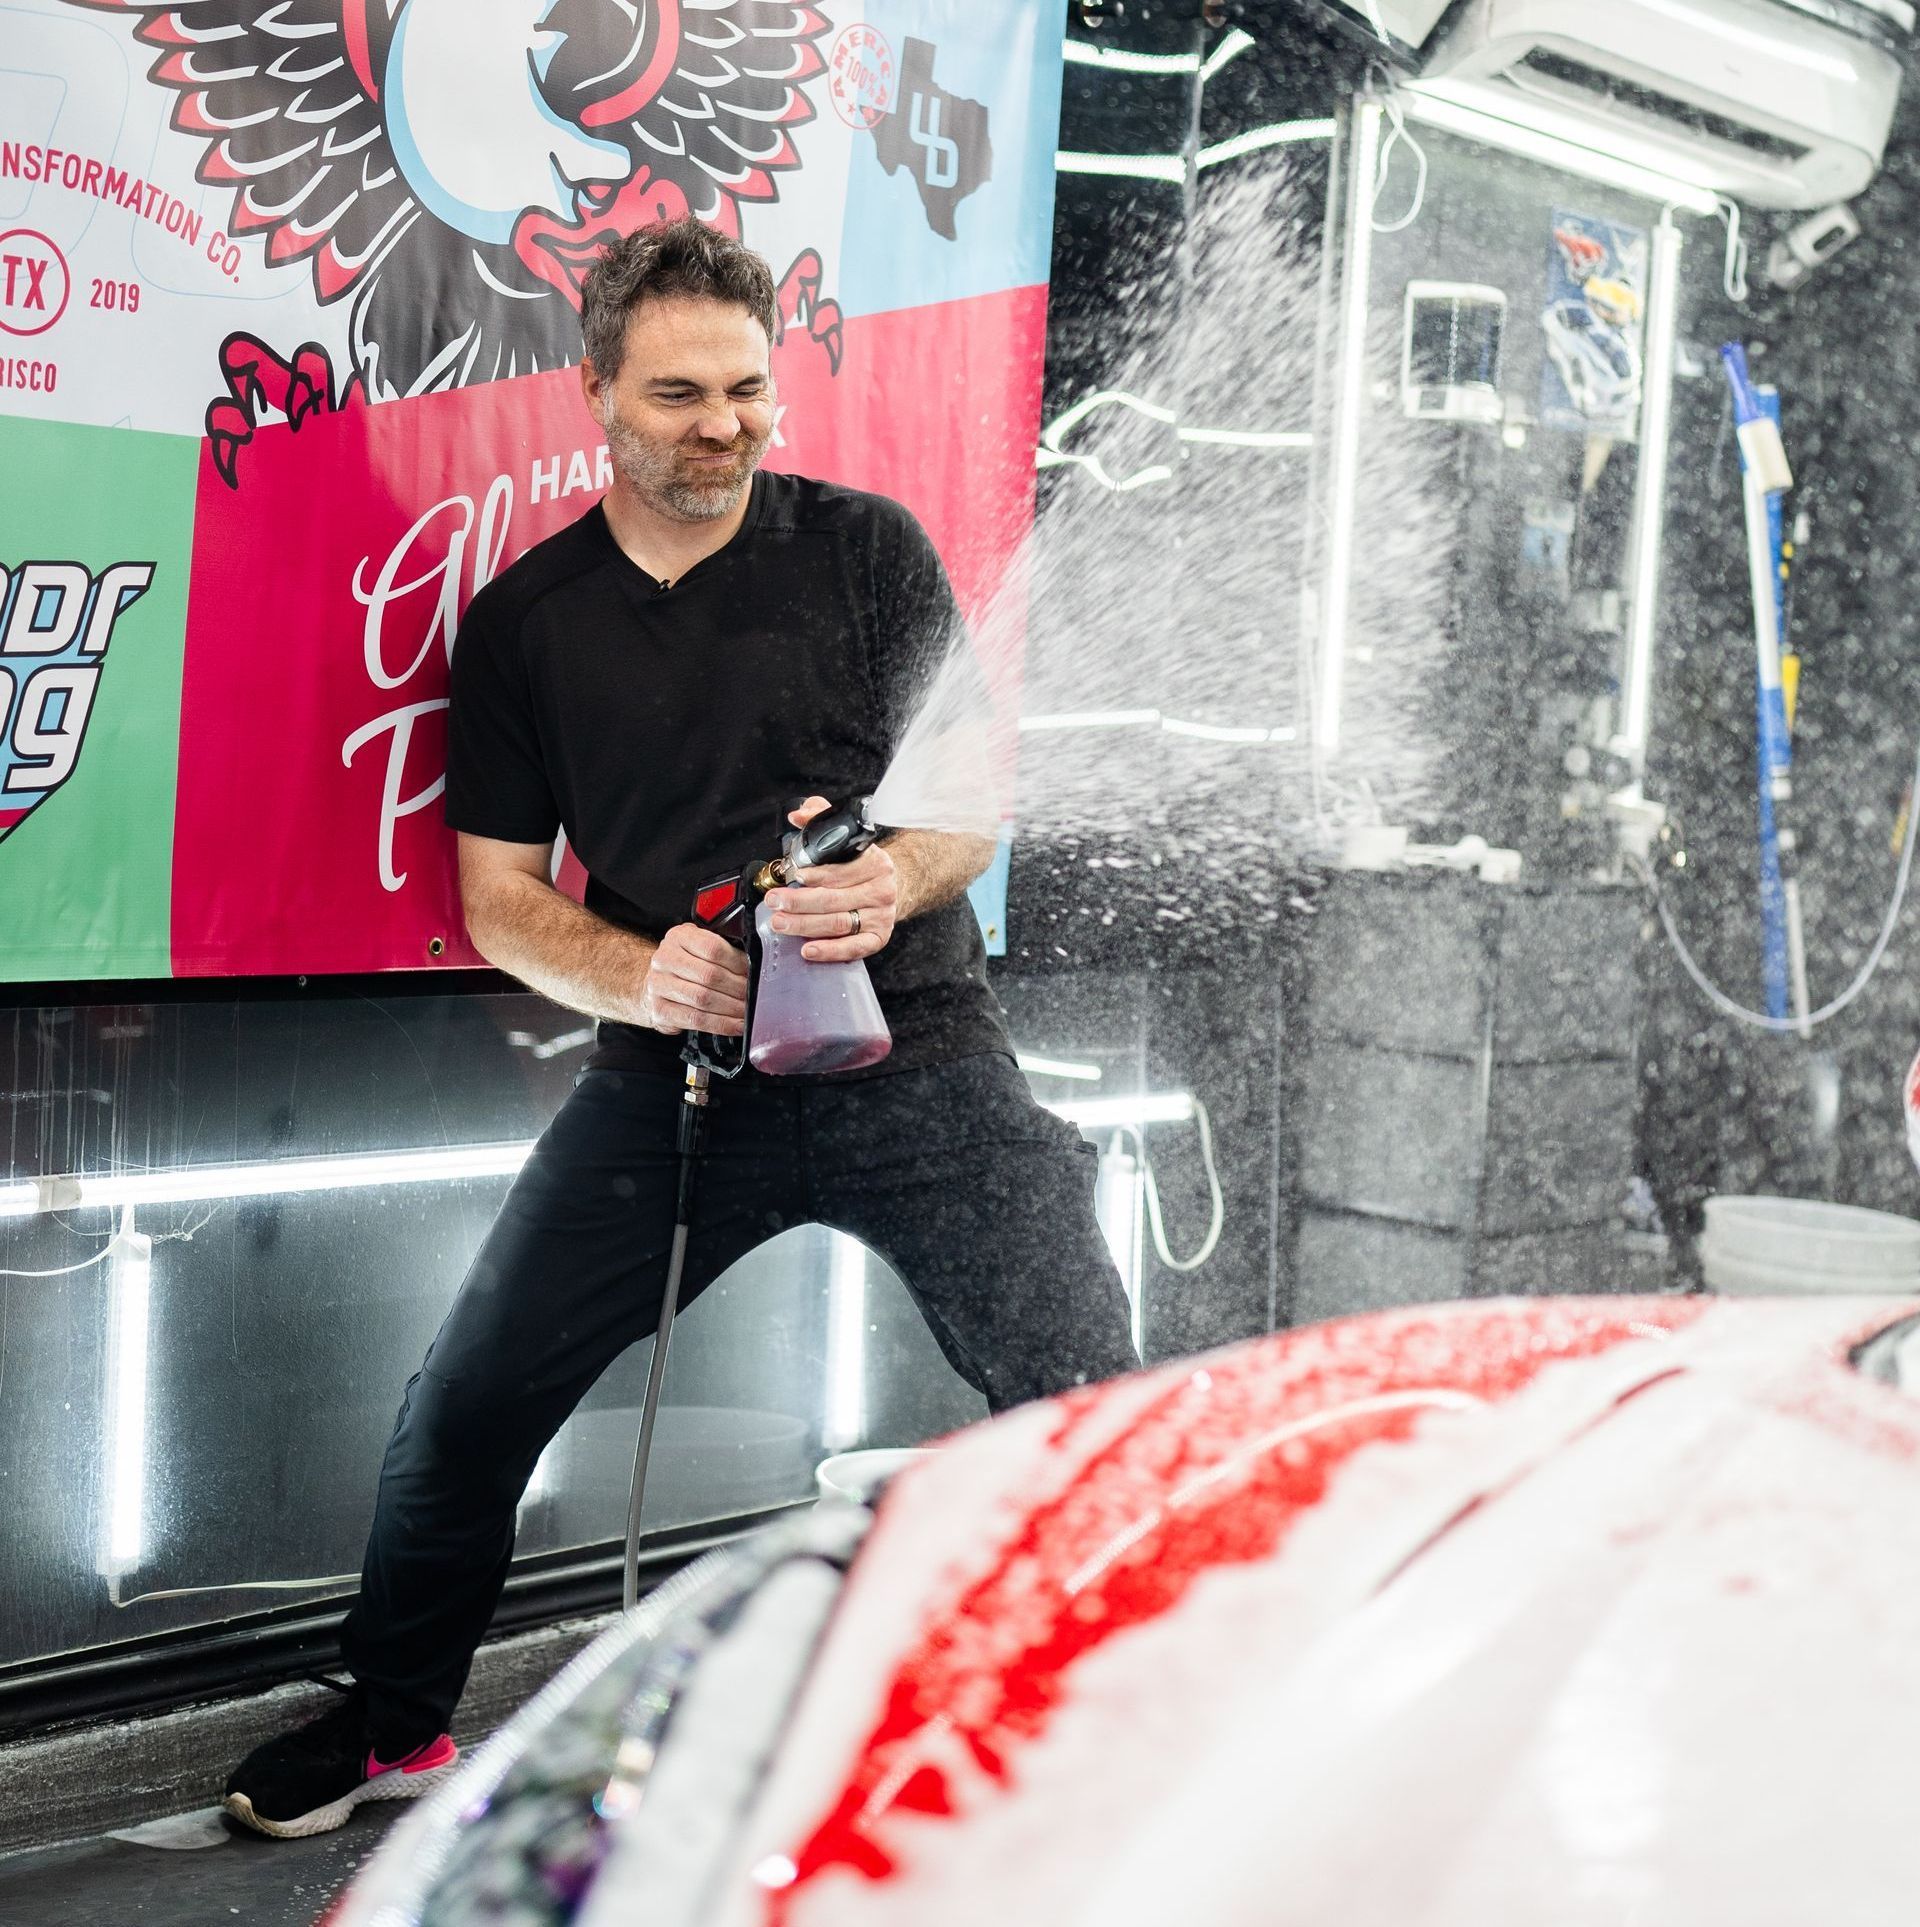 A man is spraying water on a car in a garage.